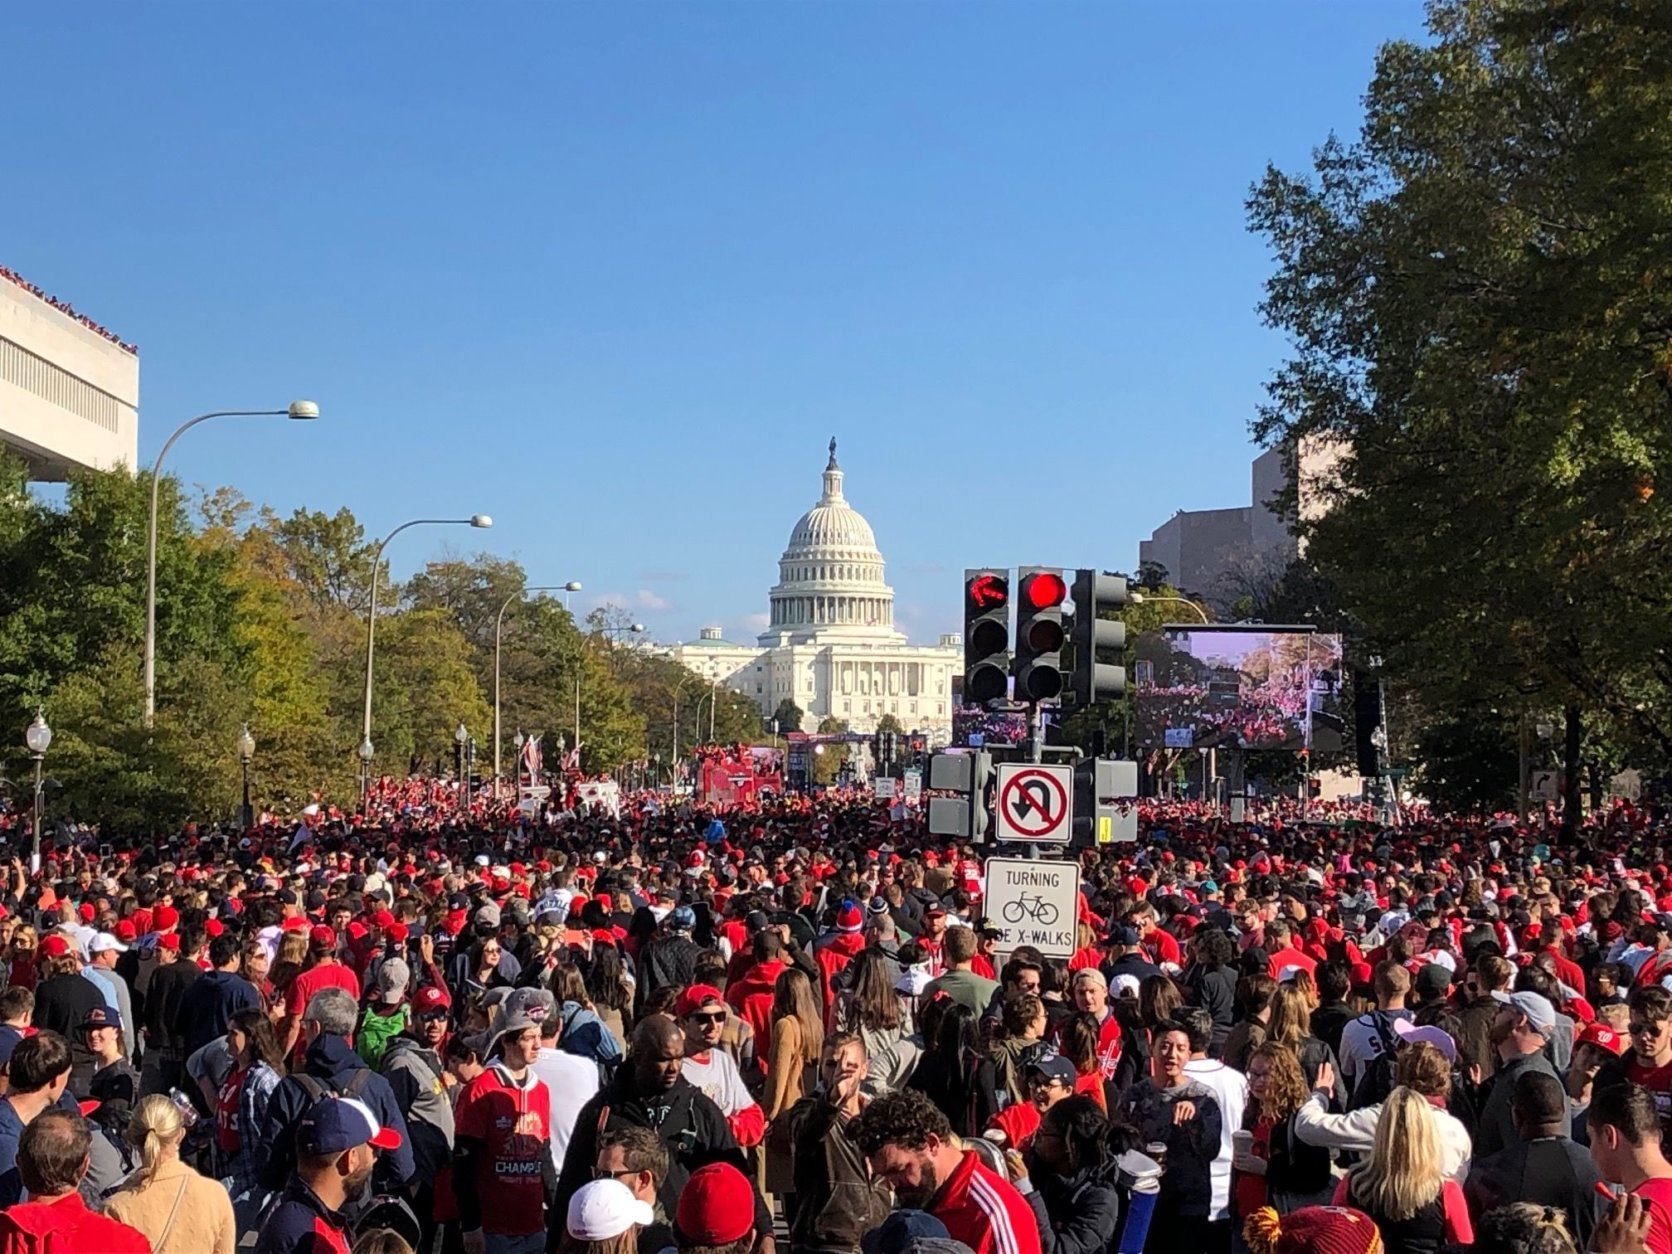 Washington Nationals celebrate World Series win in DC with parade among  thousands of fans - ABC News